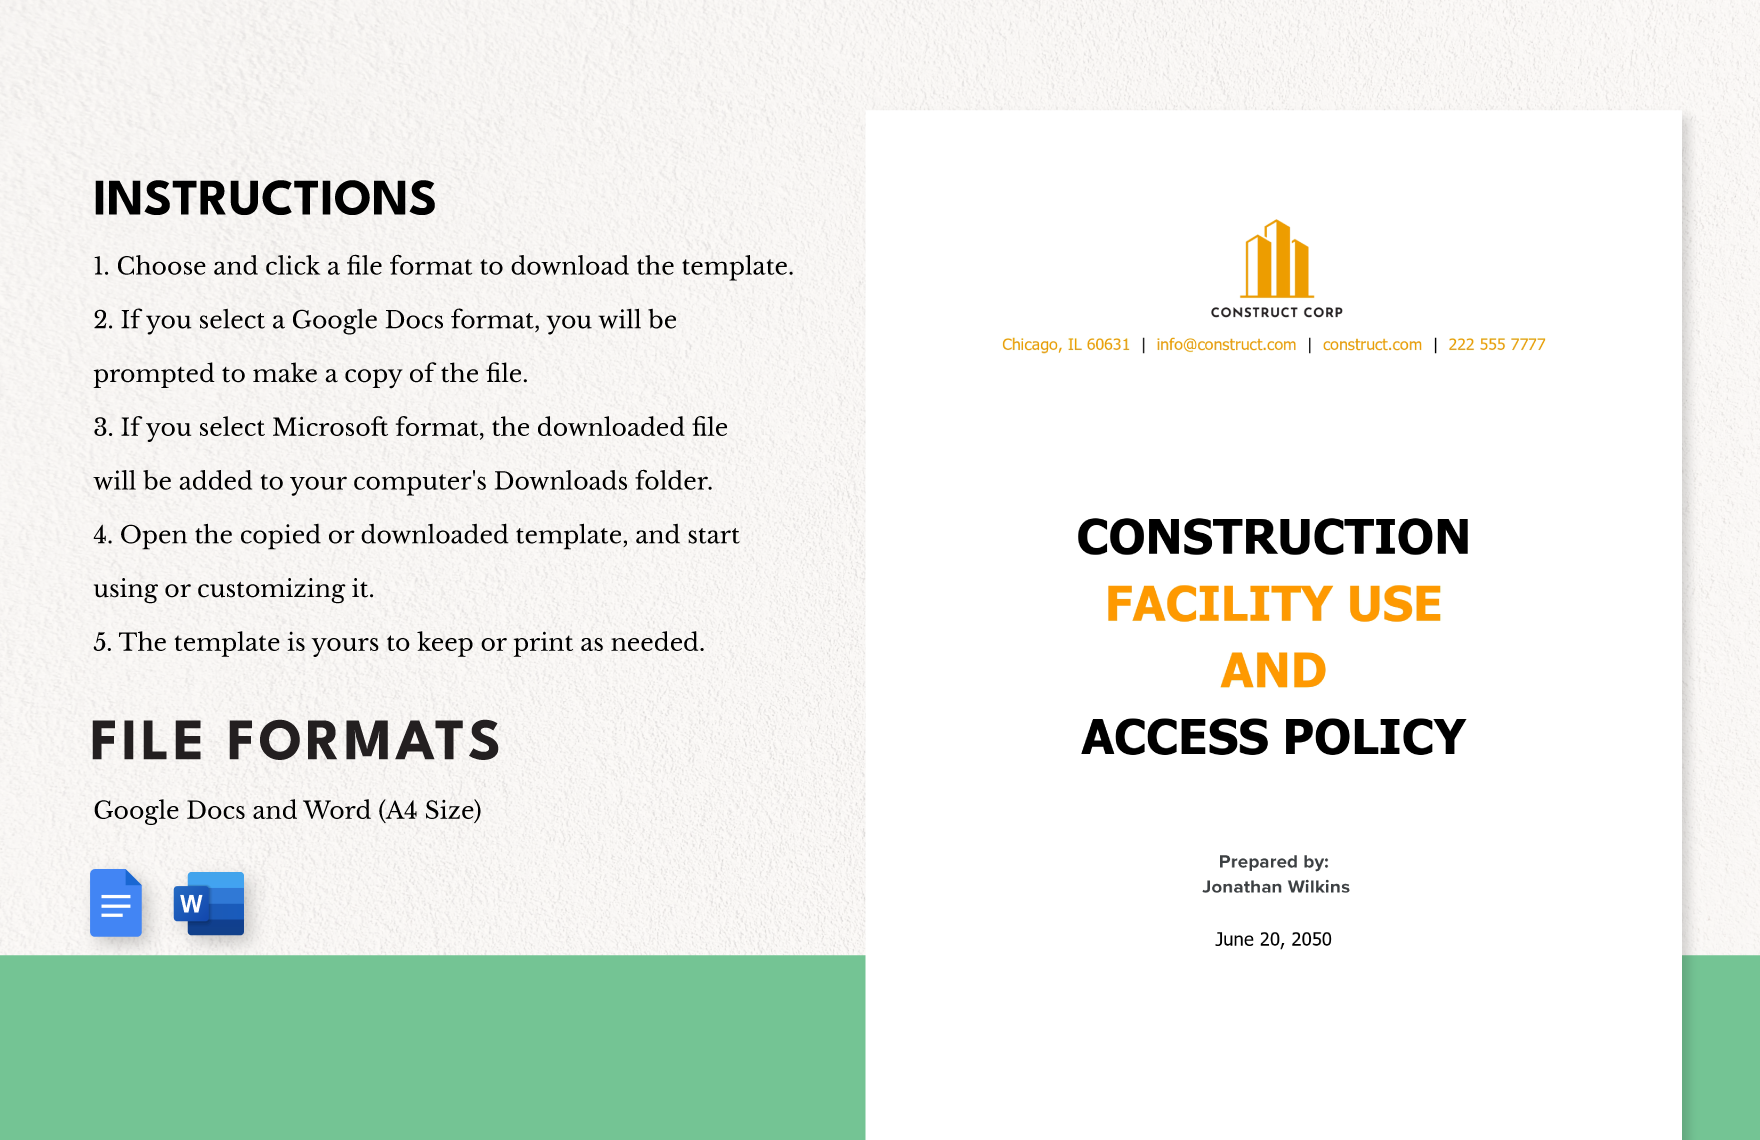 Construction Facility Use and Access Policy Template